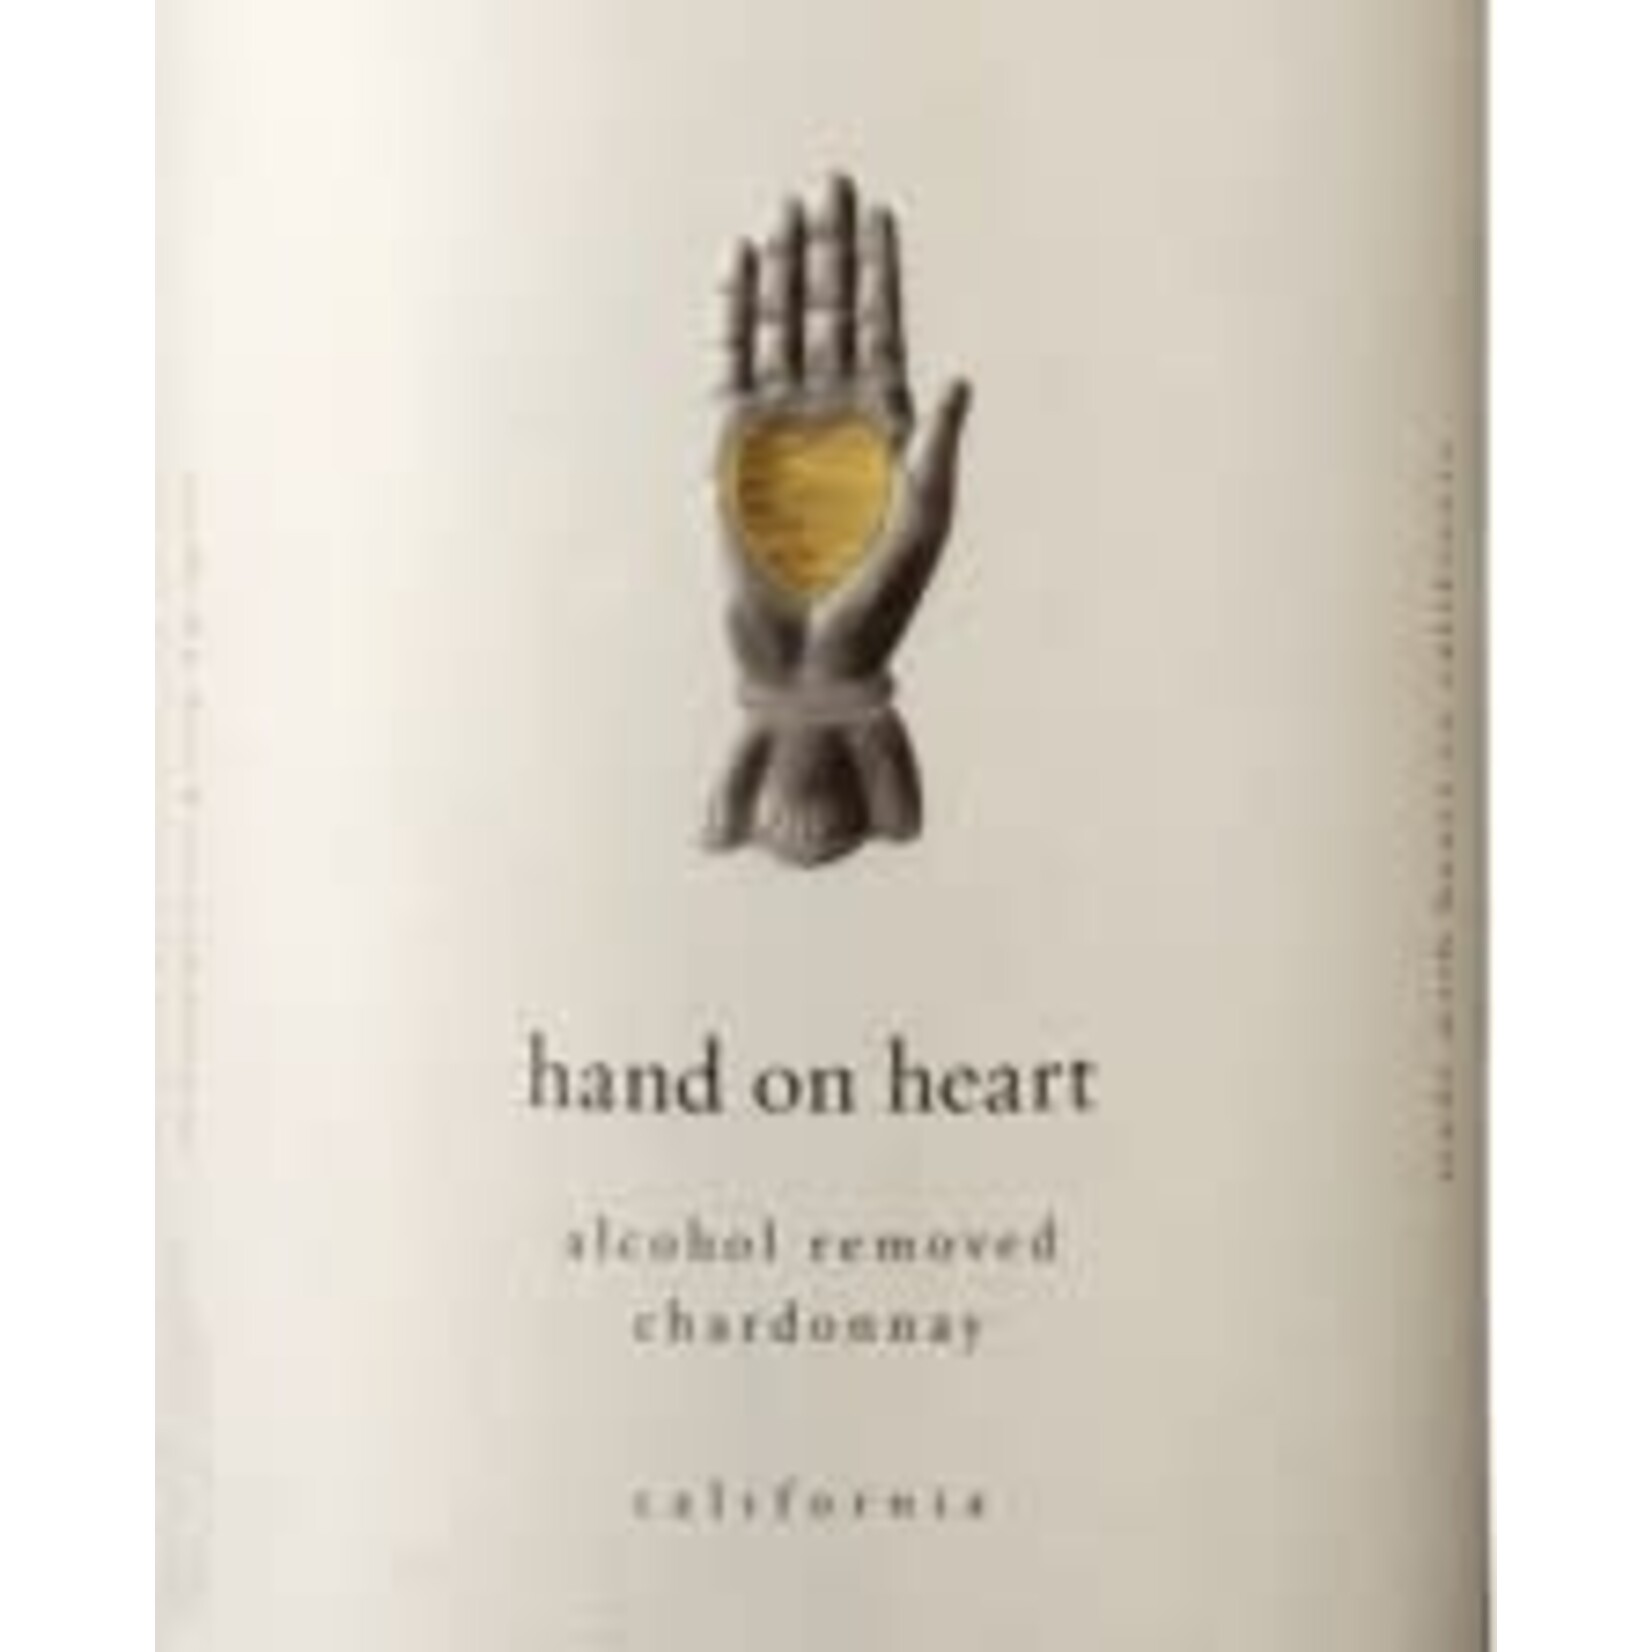 Hand on Heart Alcohol Removed Chardonnay California